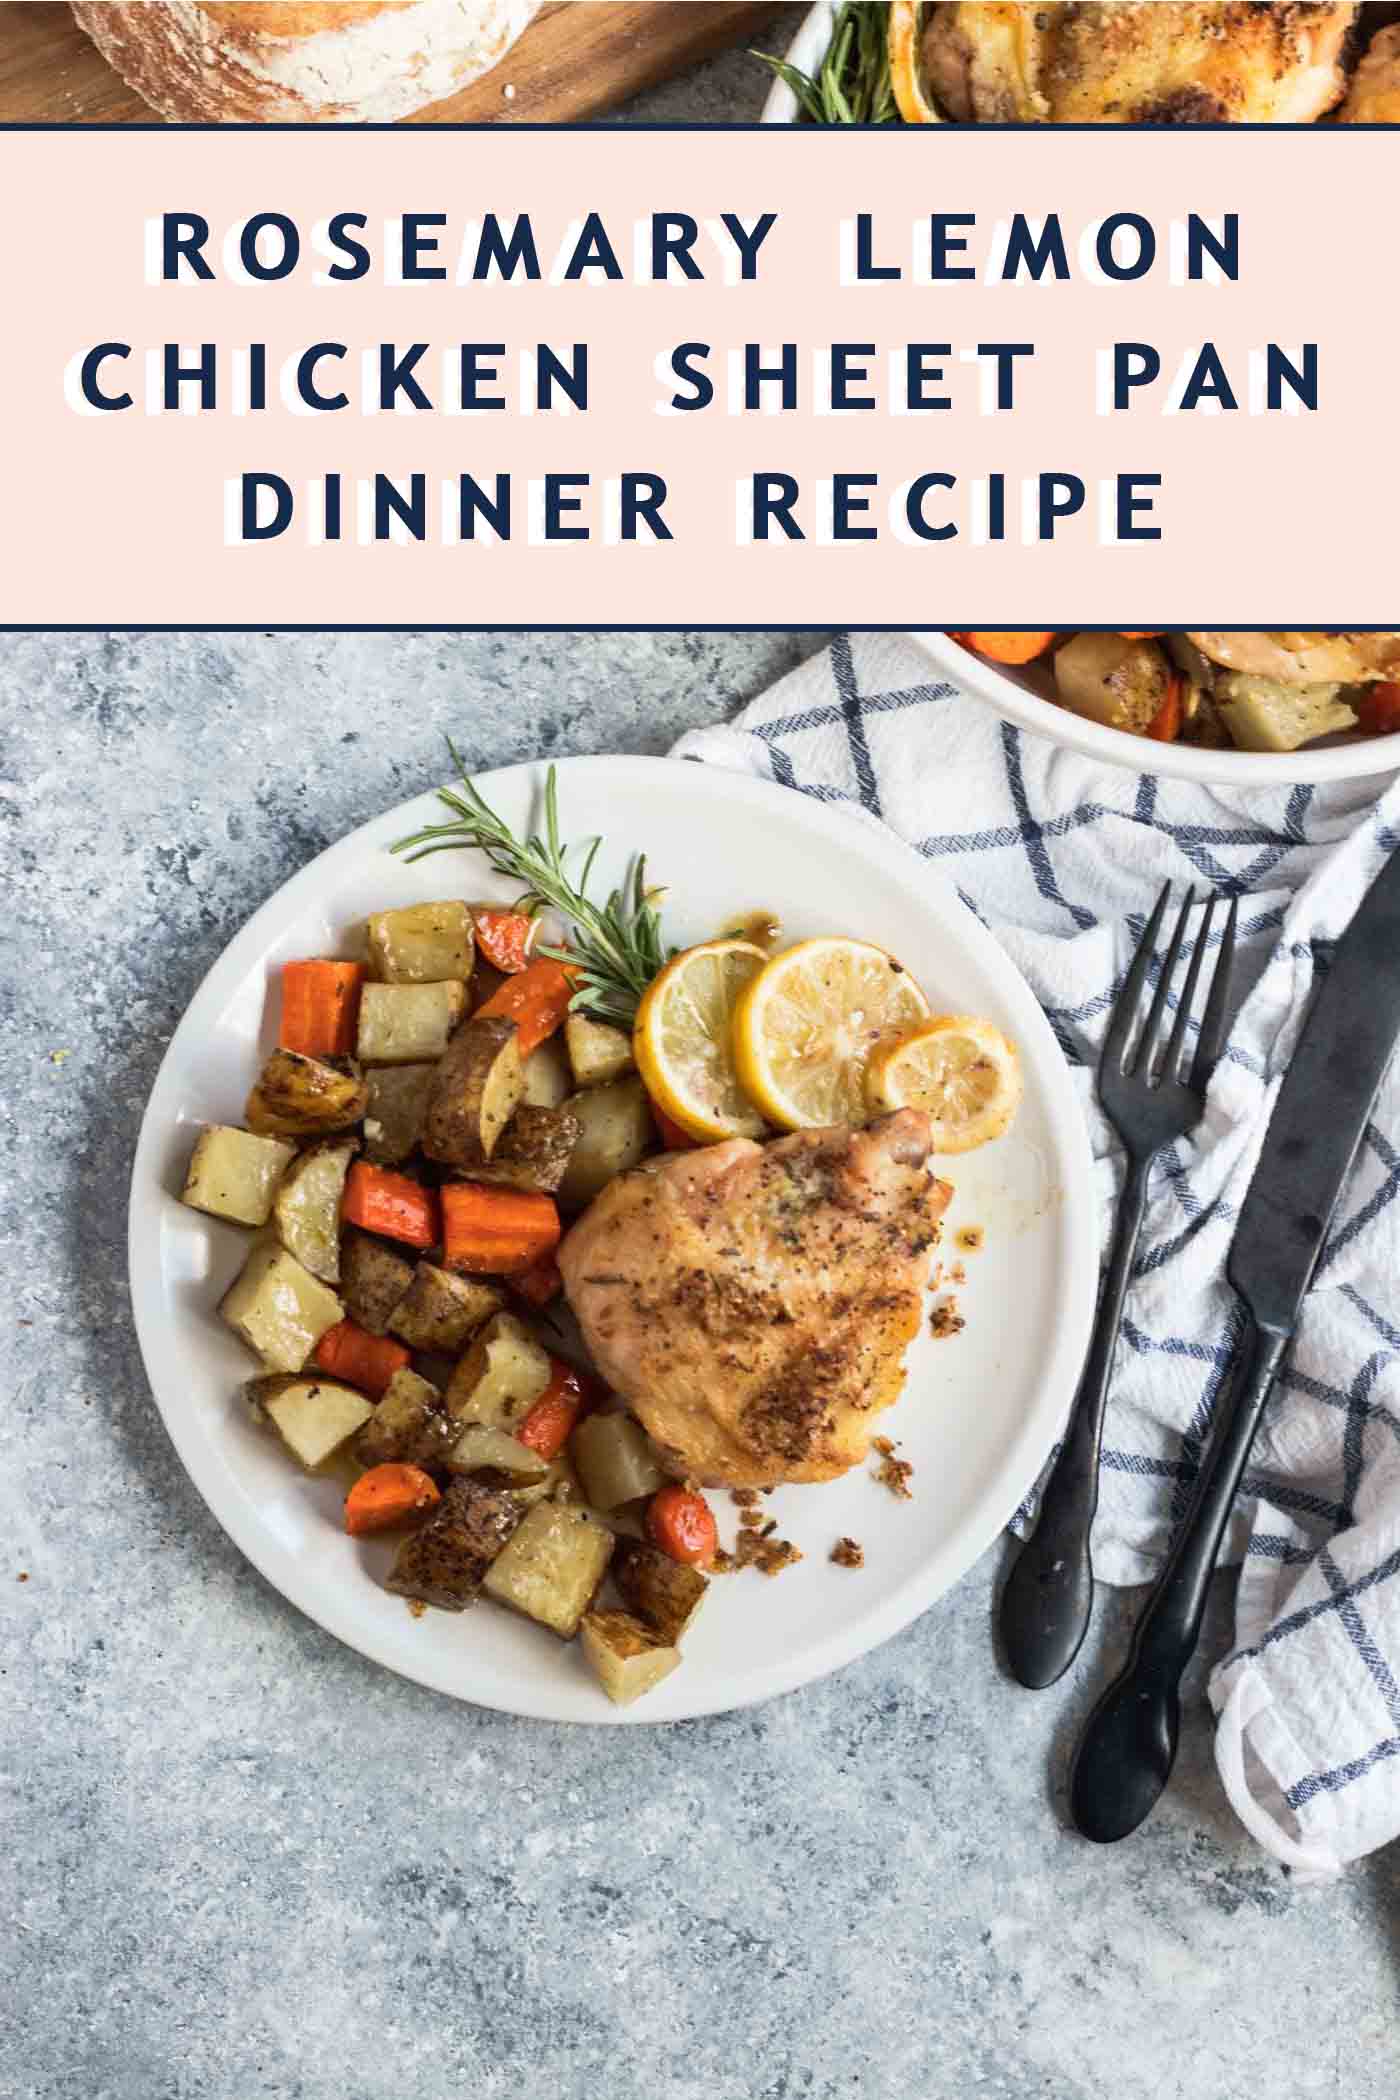 photo of the Rosemary Lemon Chicken Sheet Pan Dinner as an easy meal prep idea by top Houston lifestyle blogger Ashley Rose of Sugar & Cloth